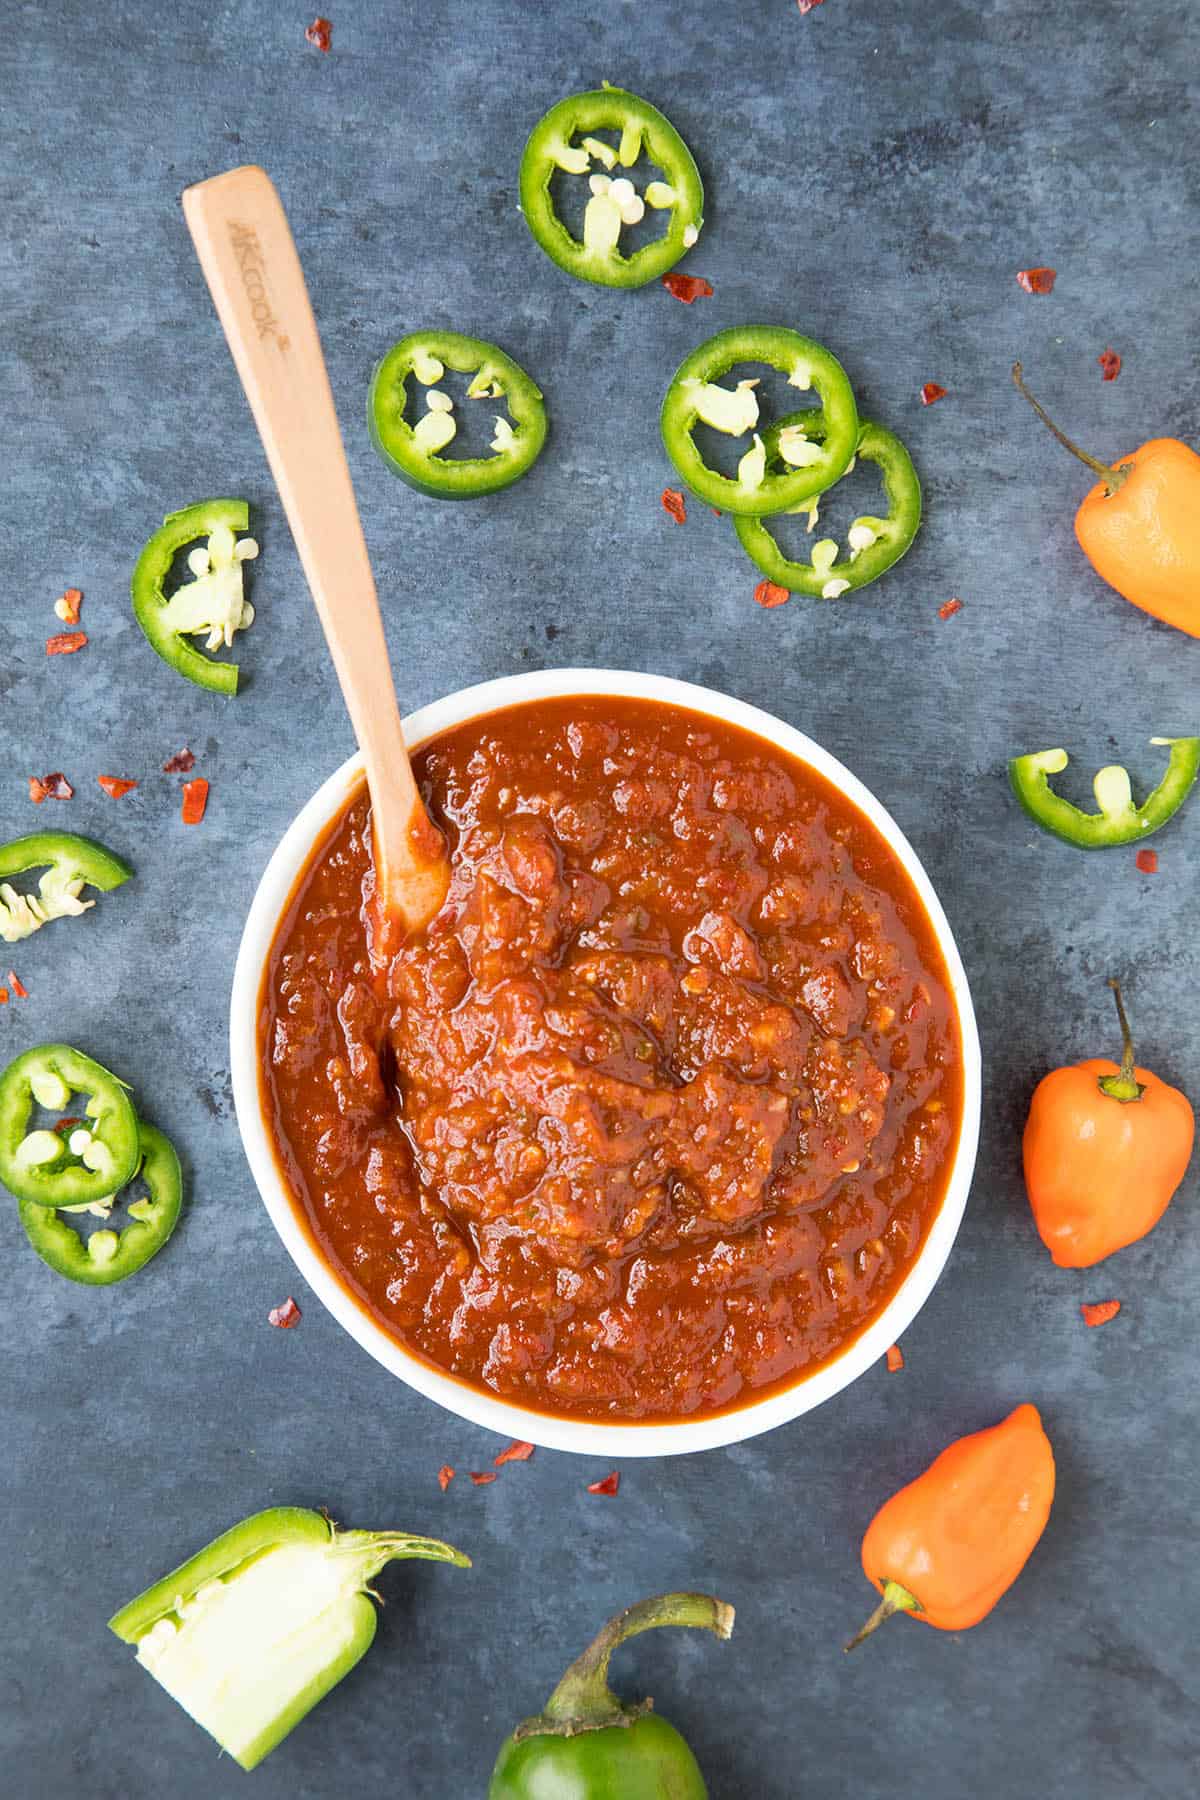 Spicy Honey BBQ Sauce - Ready for Slathering Onto Your Favorite Grilled Foods